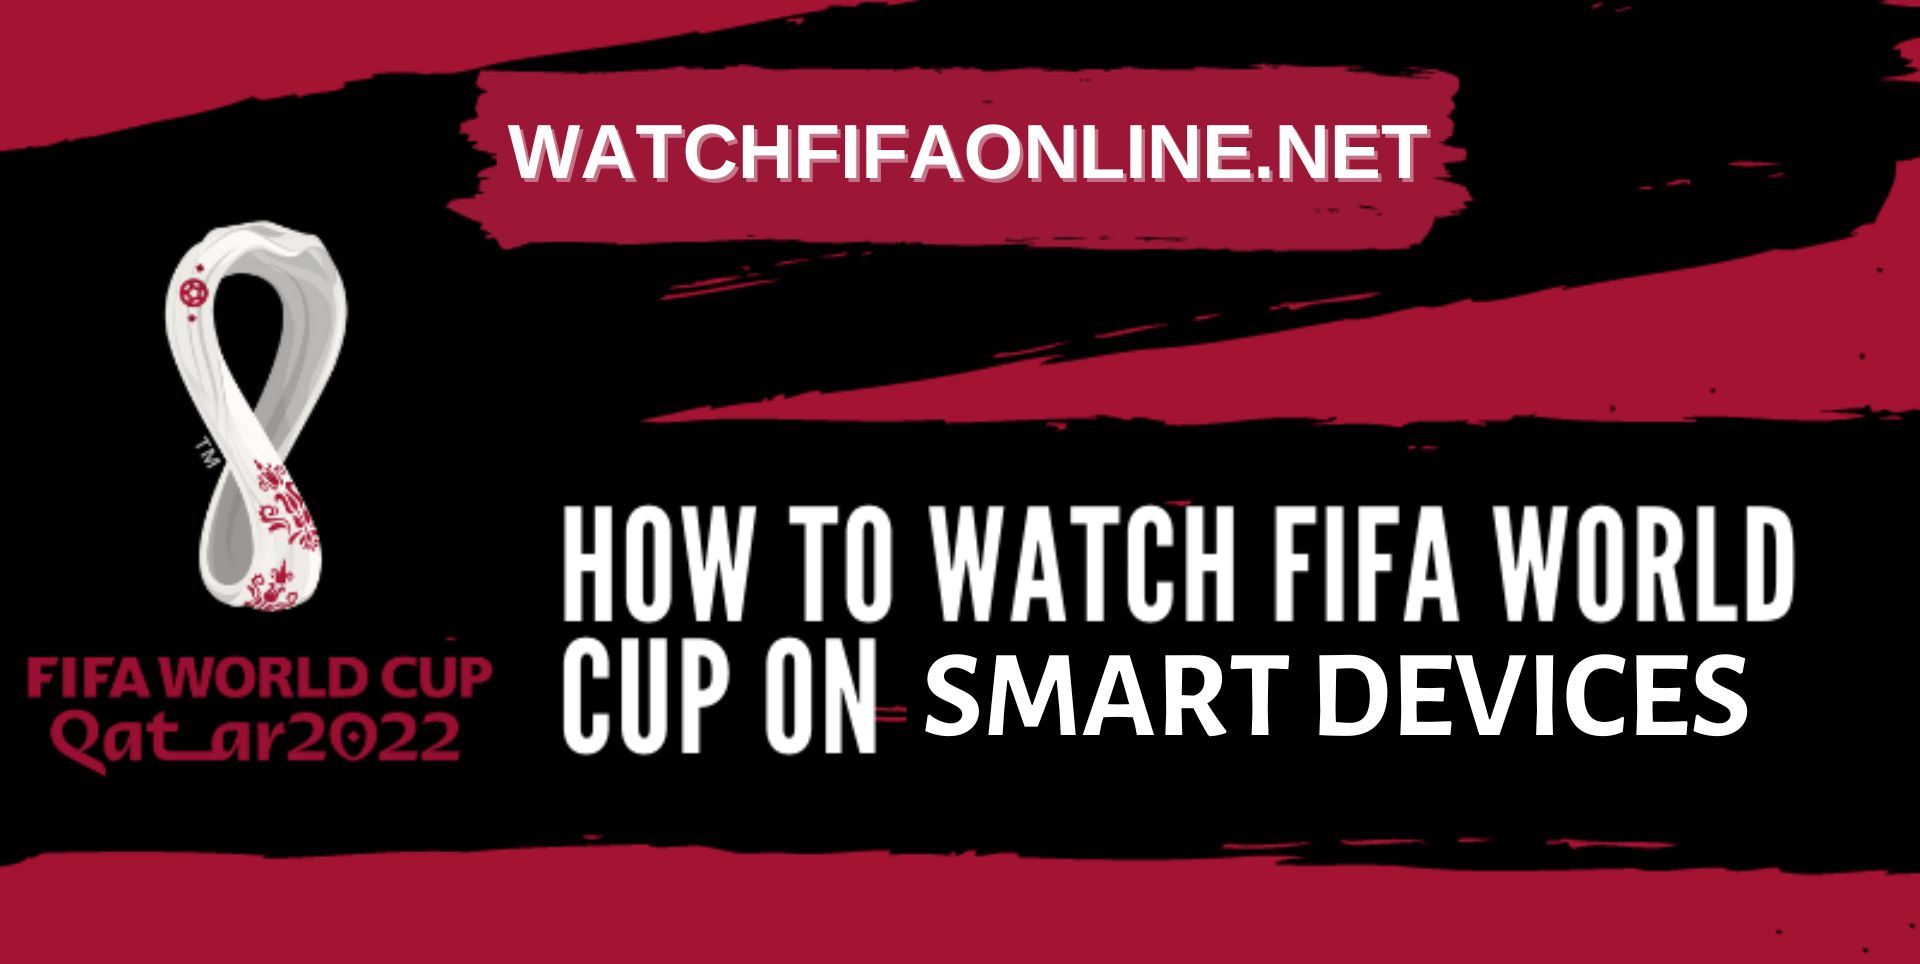 Watch Live Matches Streaming On Watch FIFA Online